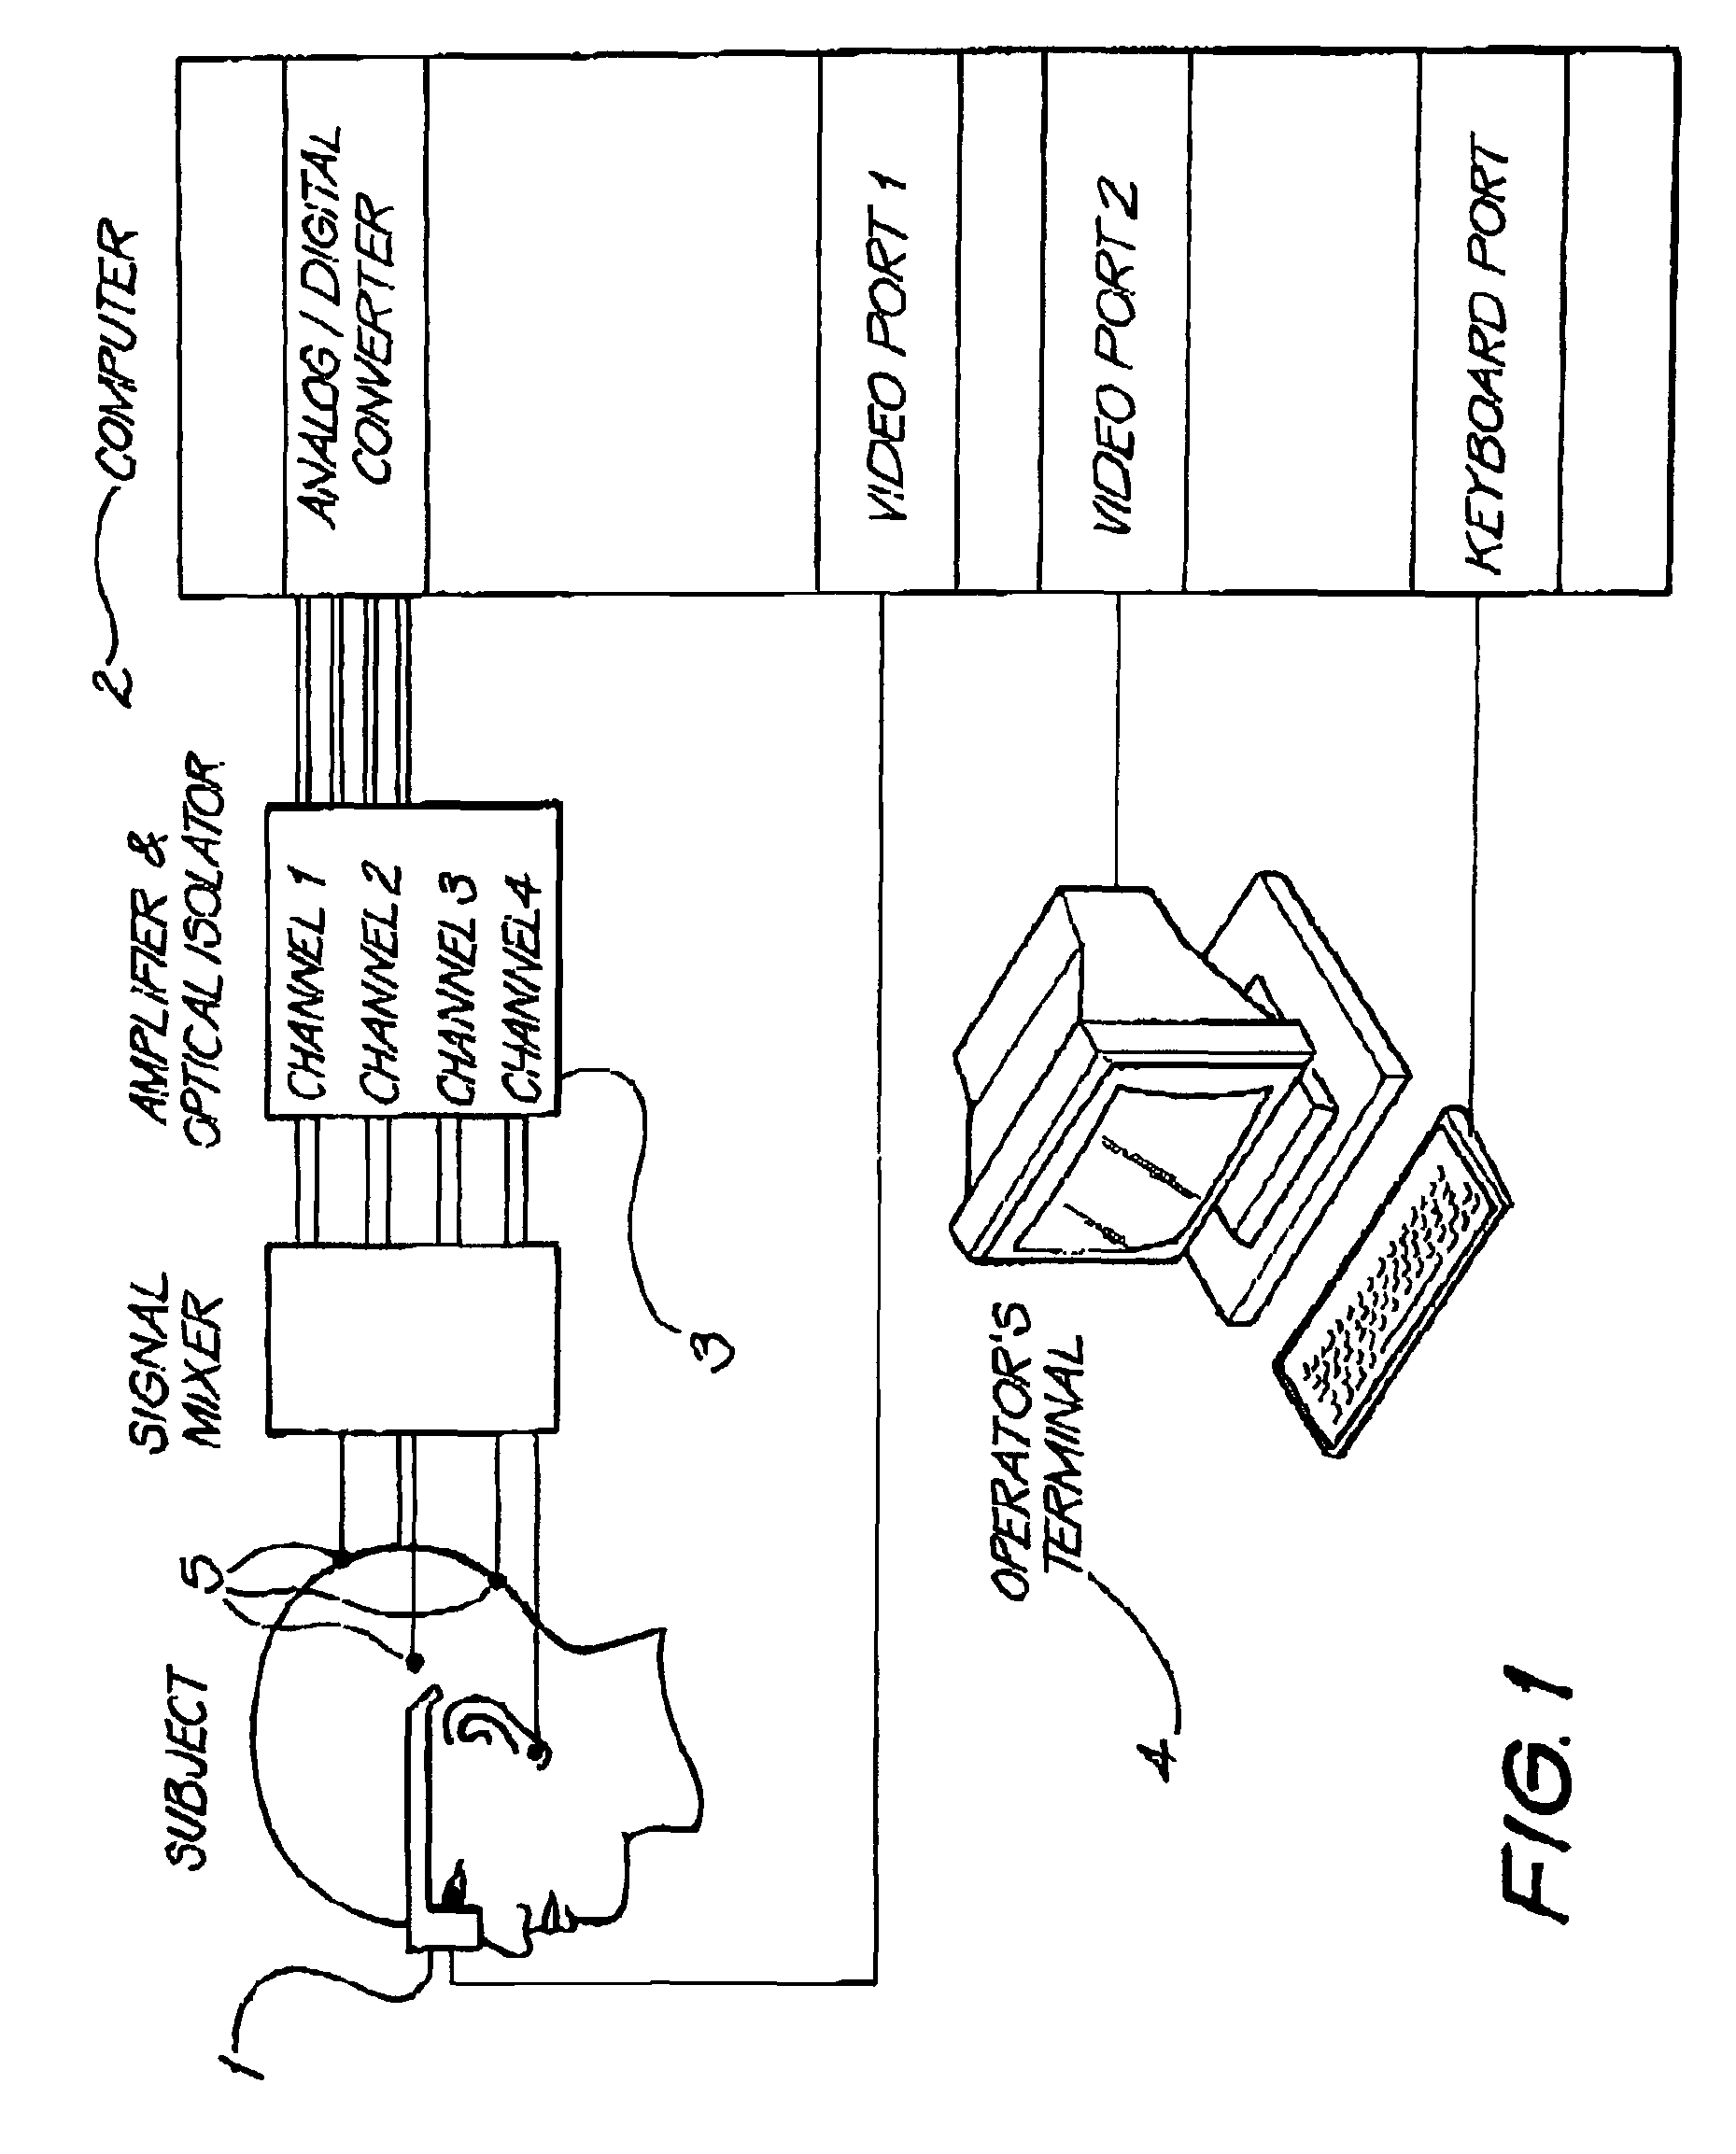 Method and apparatus for objective electrophysiological assessment of visual function